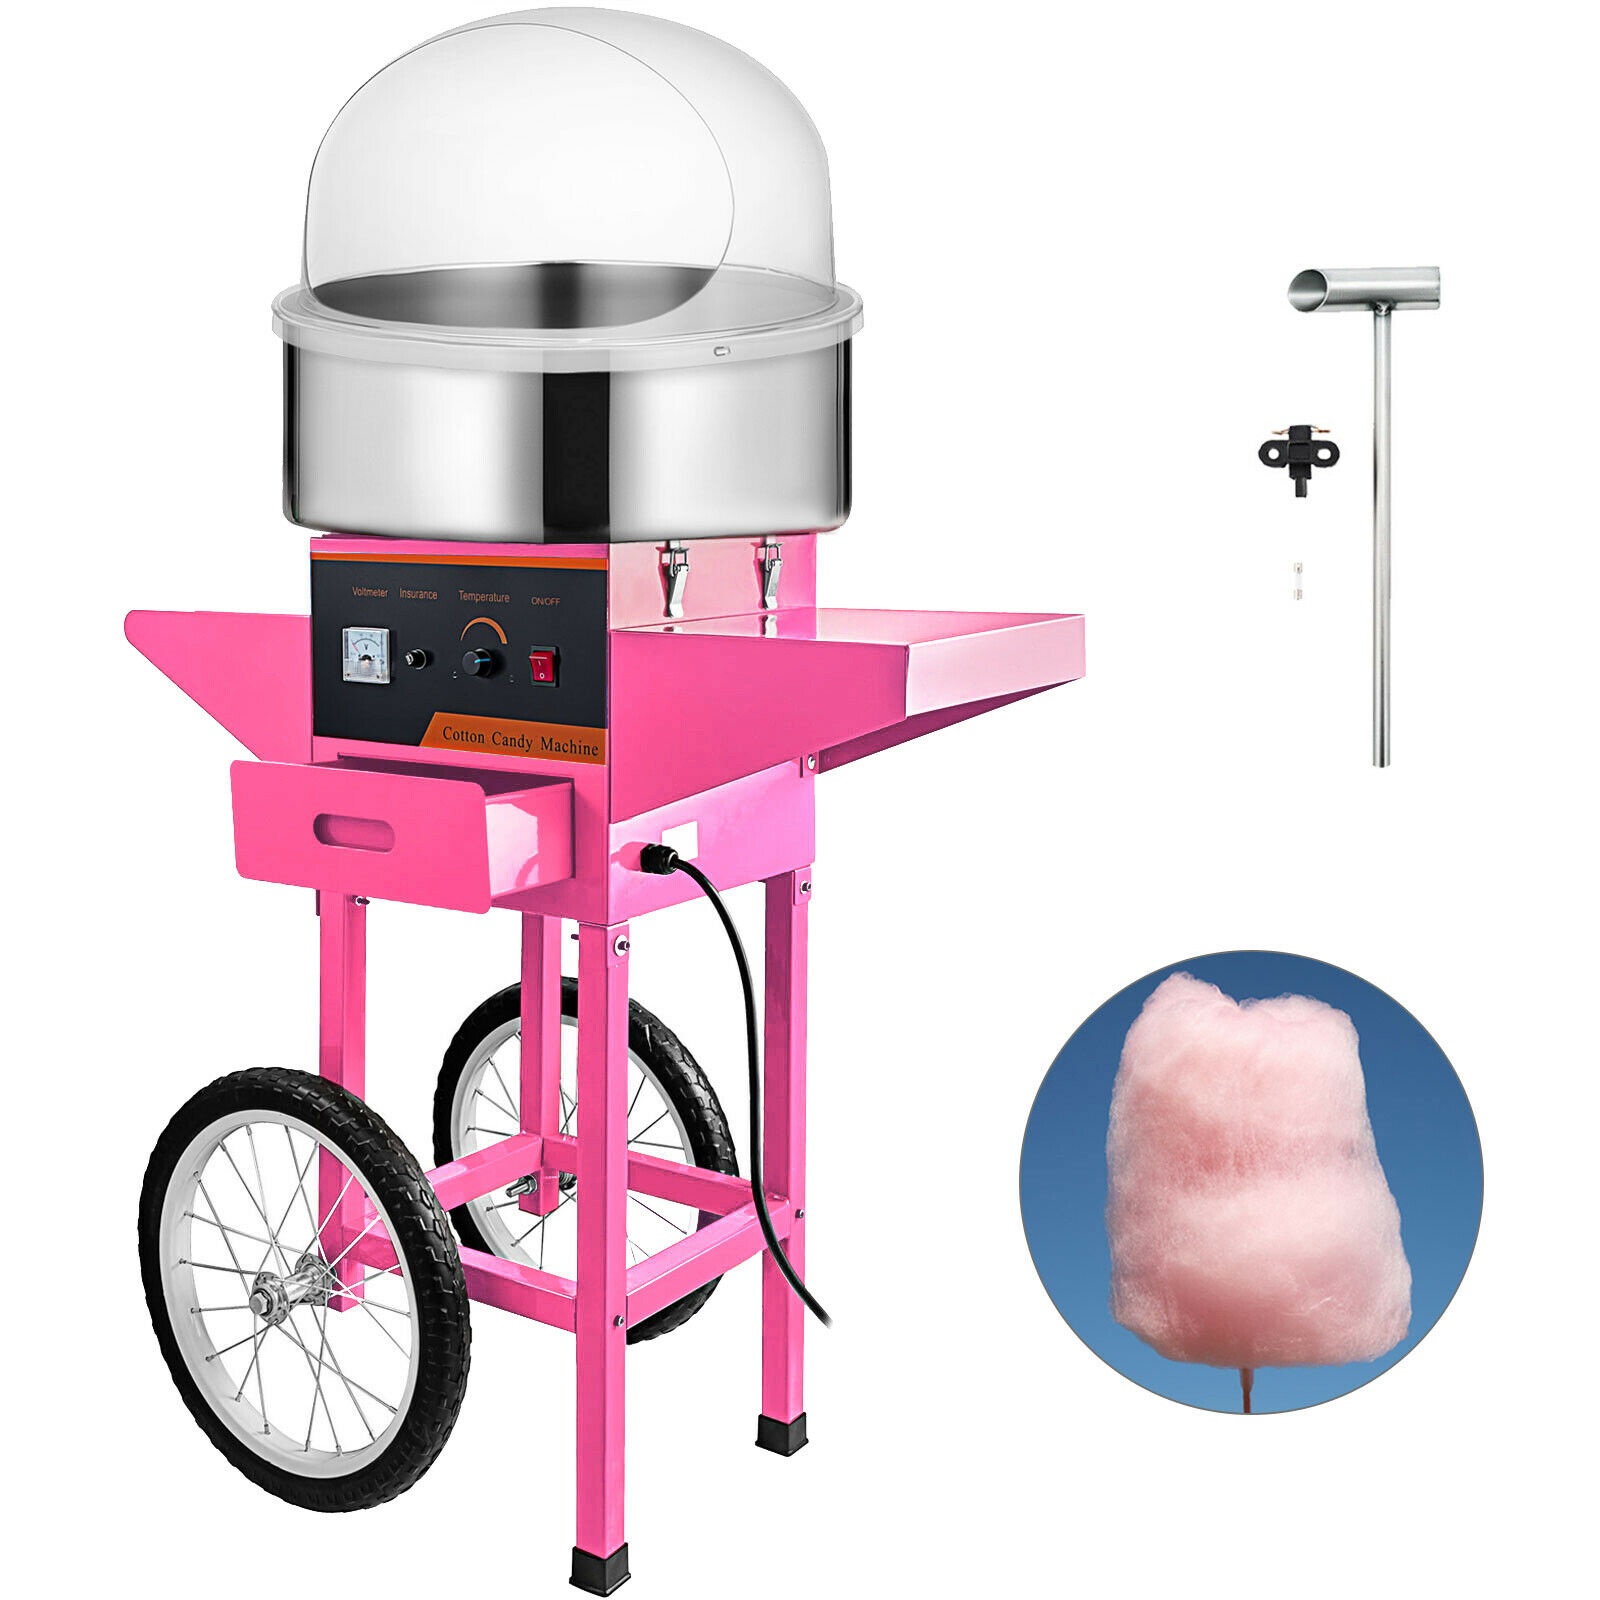 commercial cotton candy machine,pink,20 inch